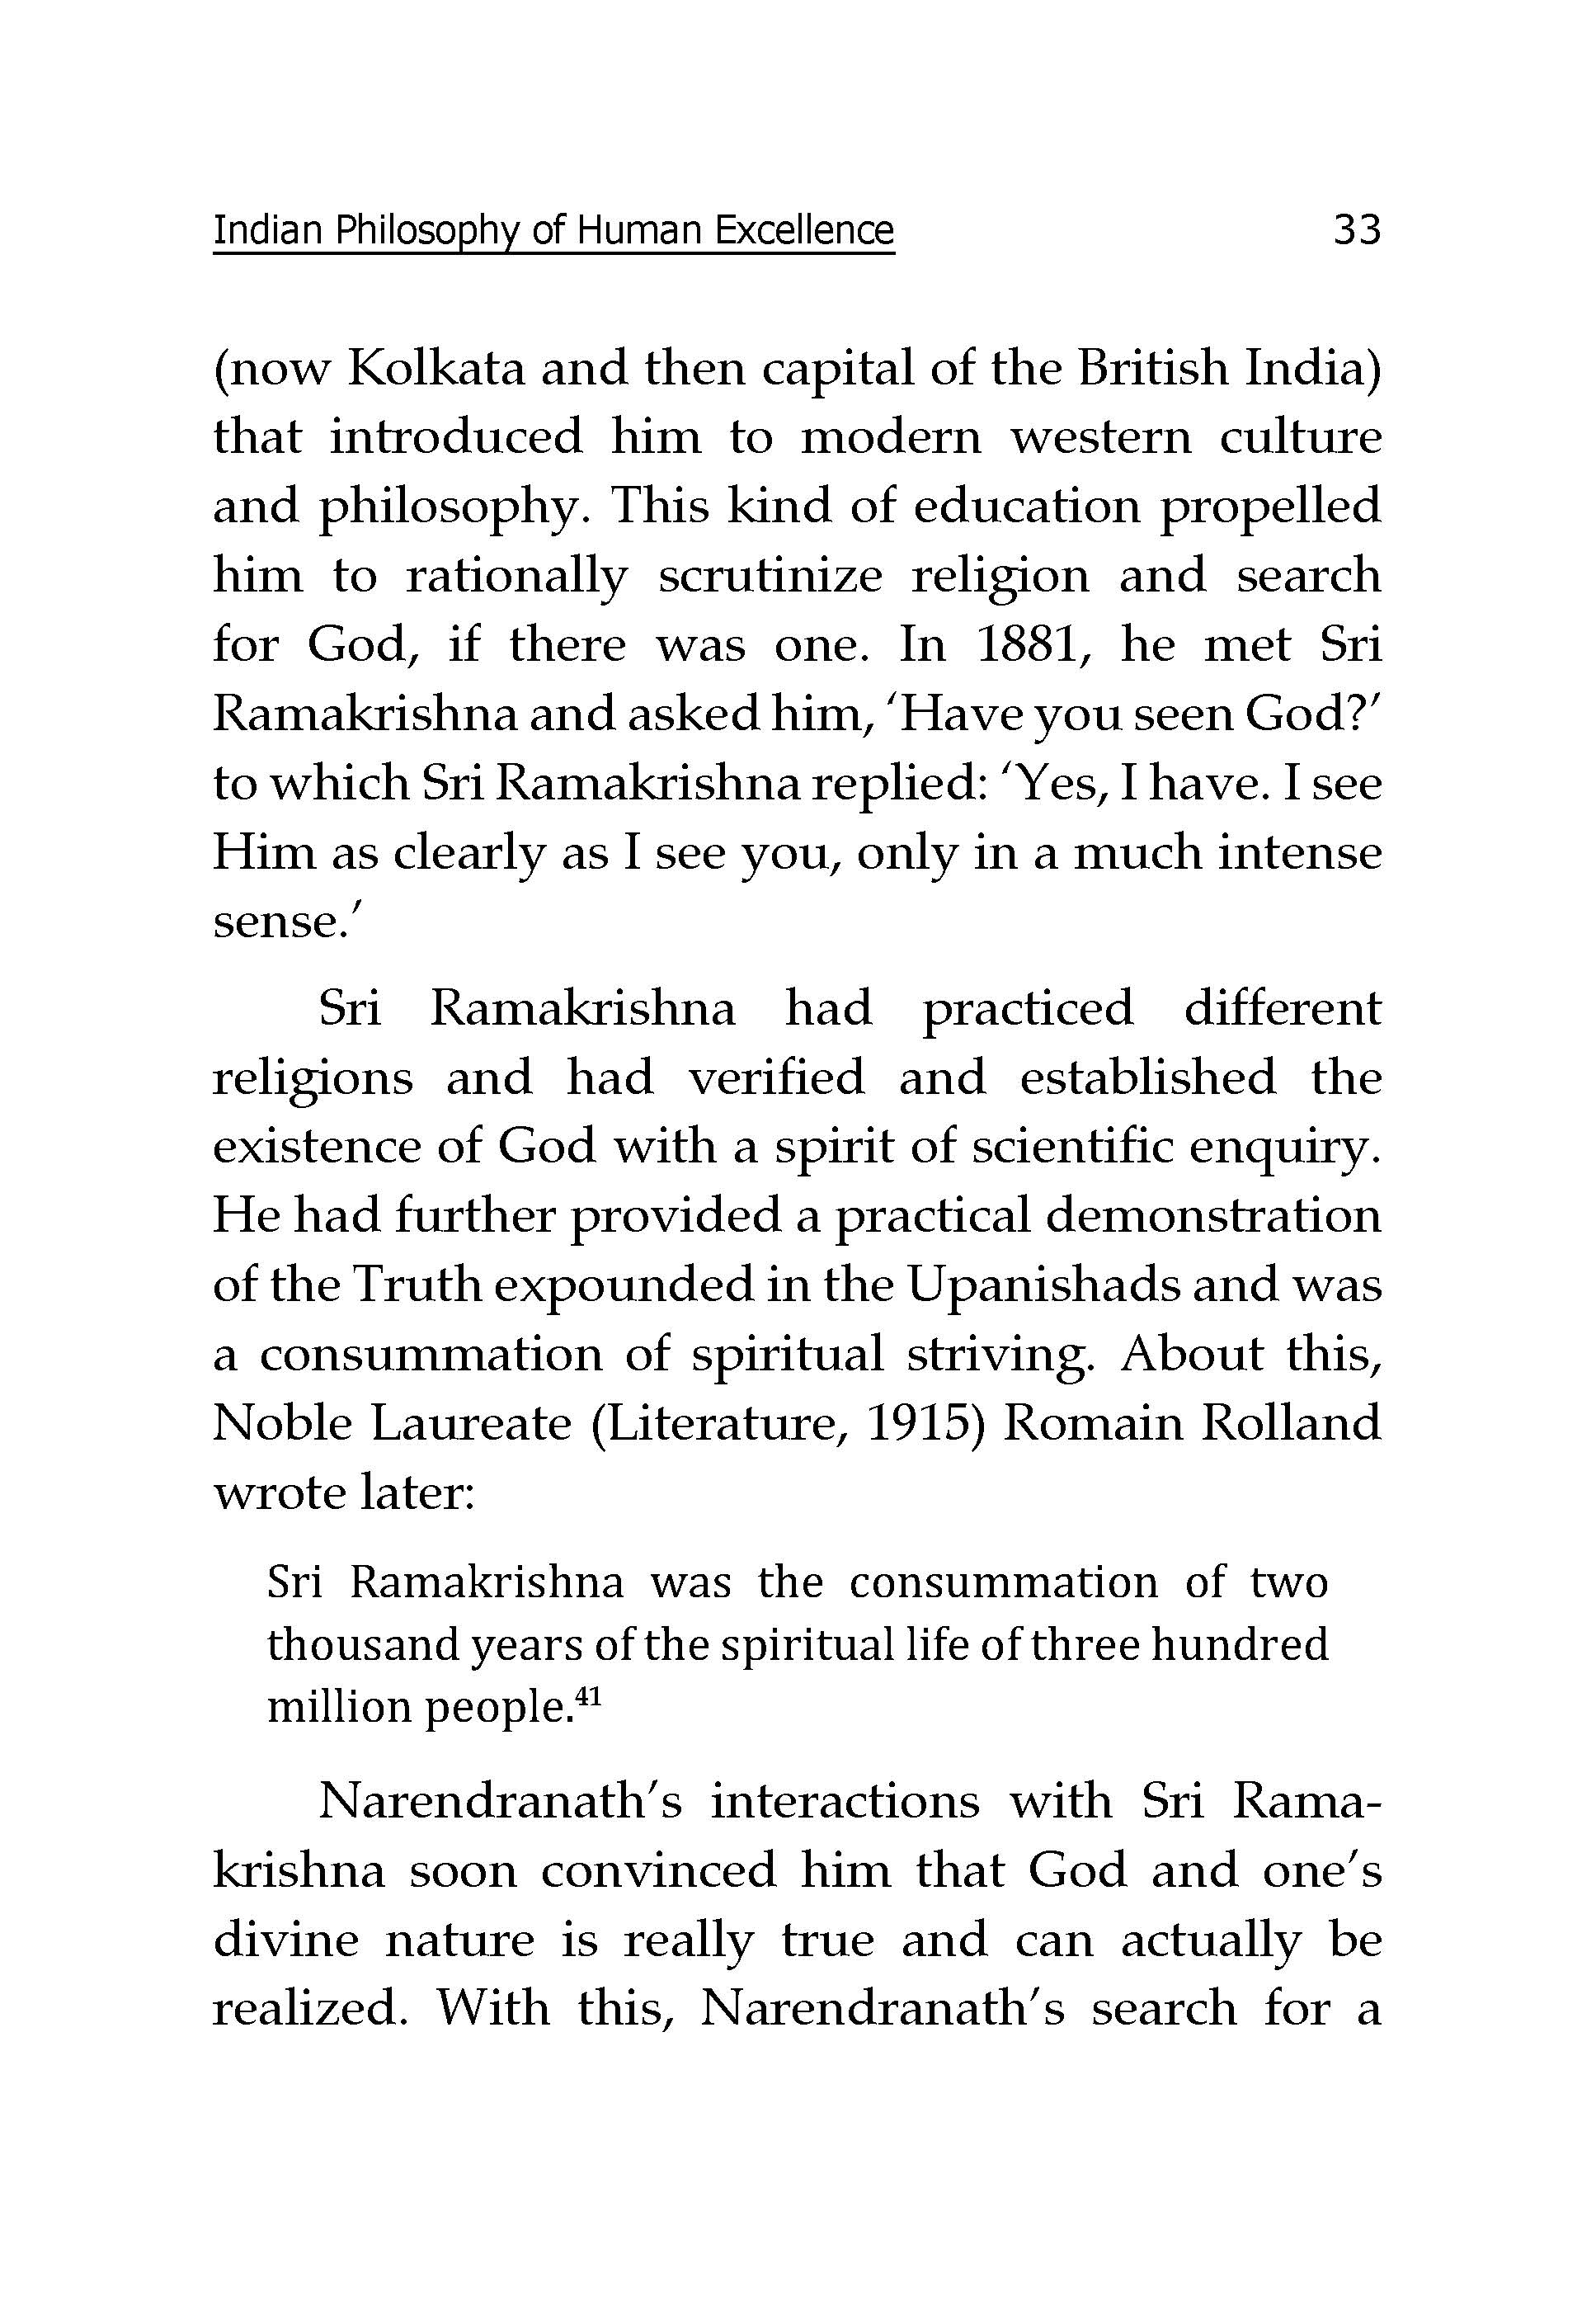 Swami Vivekananda - Modern Science and Human Excellence